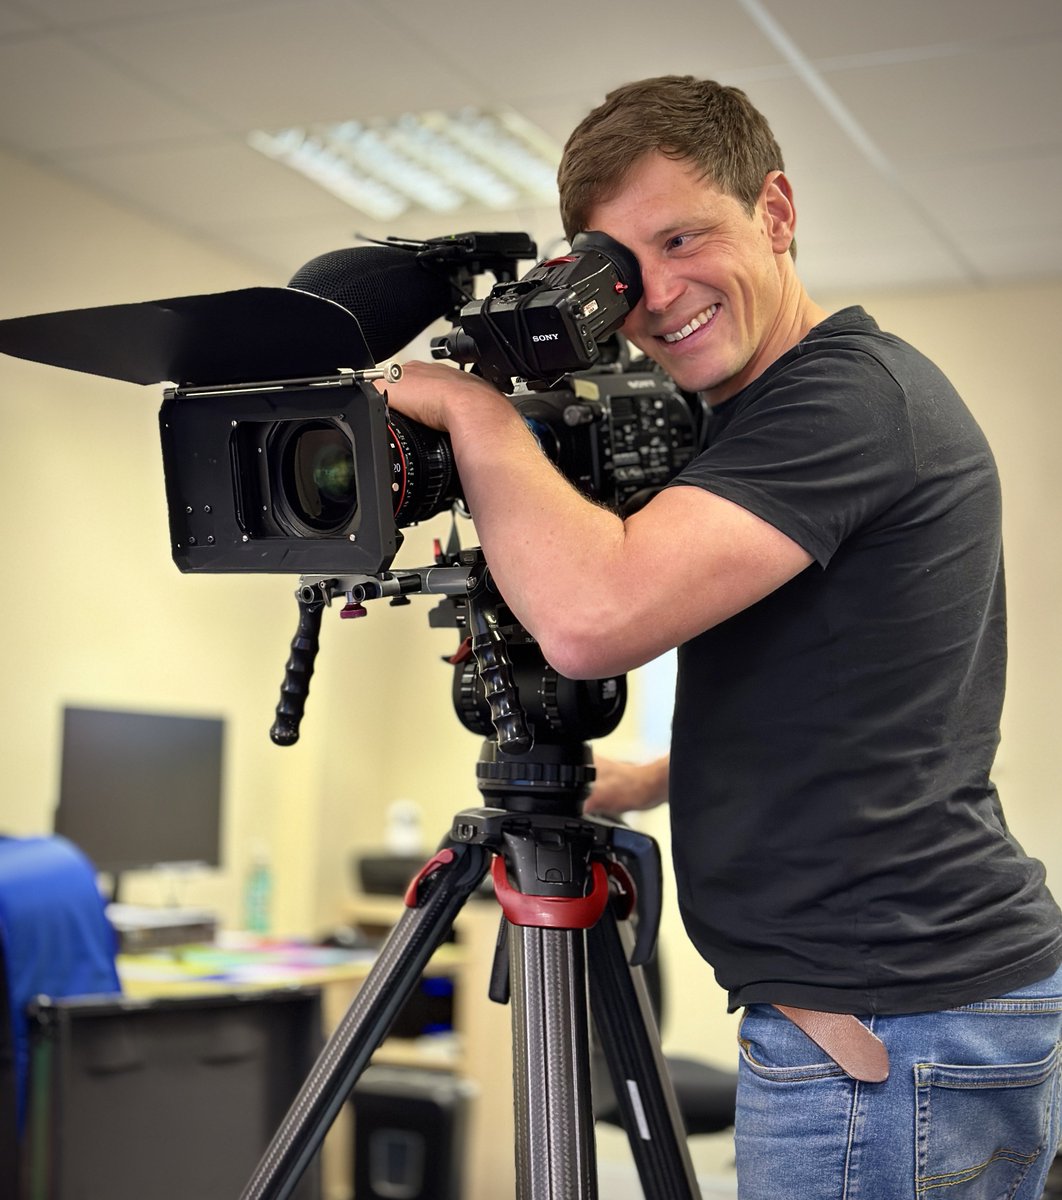 Cameraman @SimonVacher’s in our office today testing a new tripod head. #broadcast #tripod #Grip